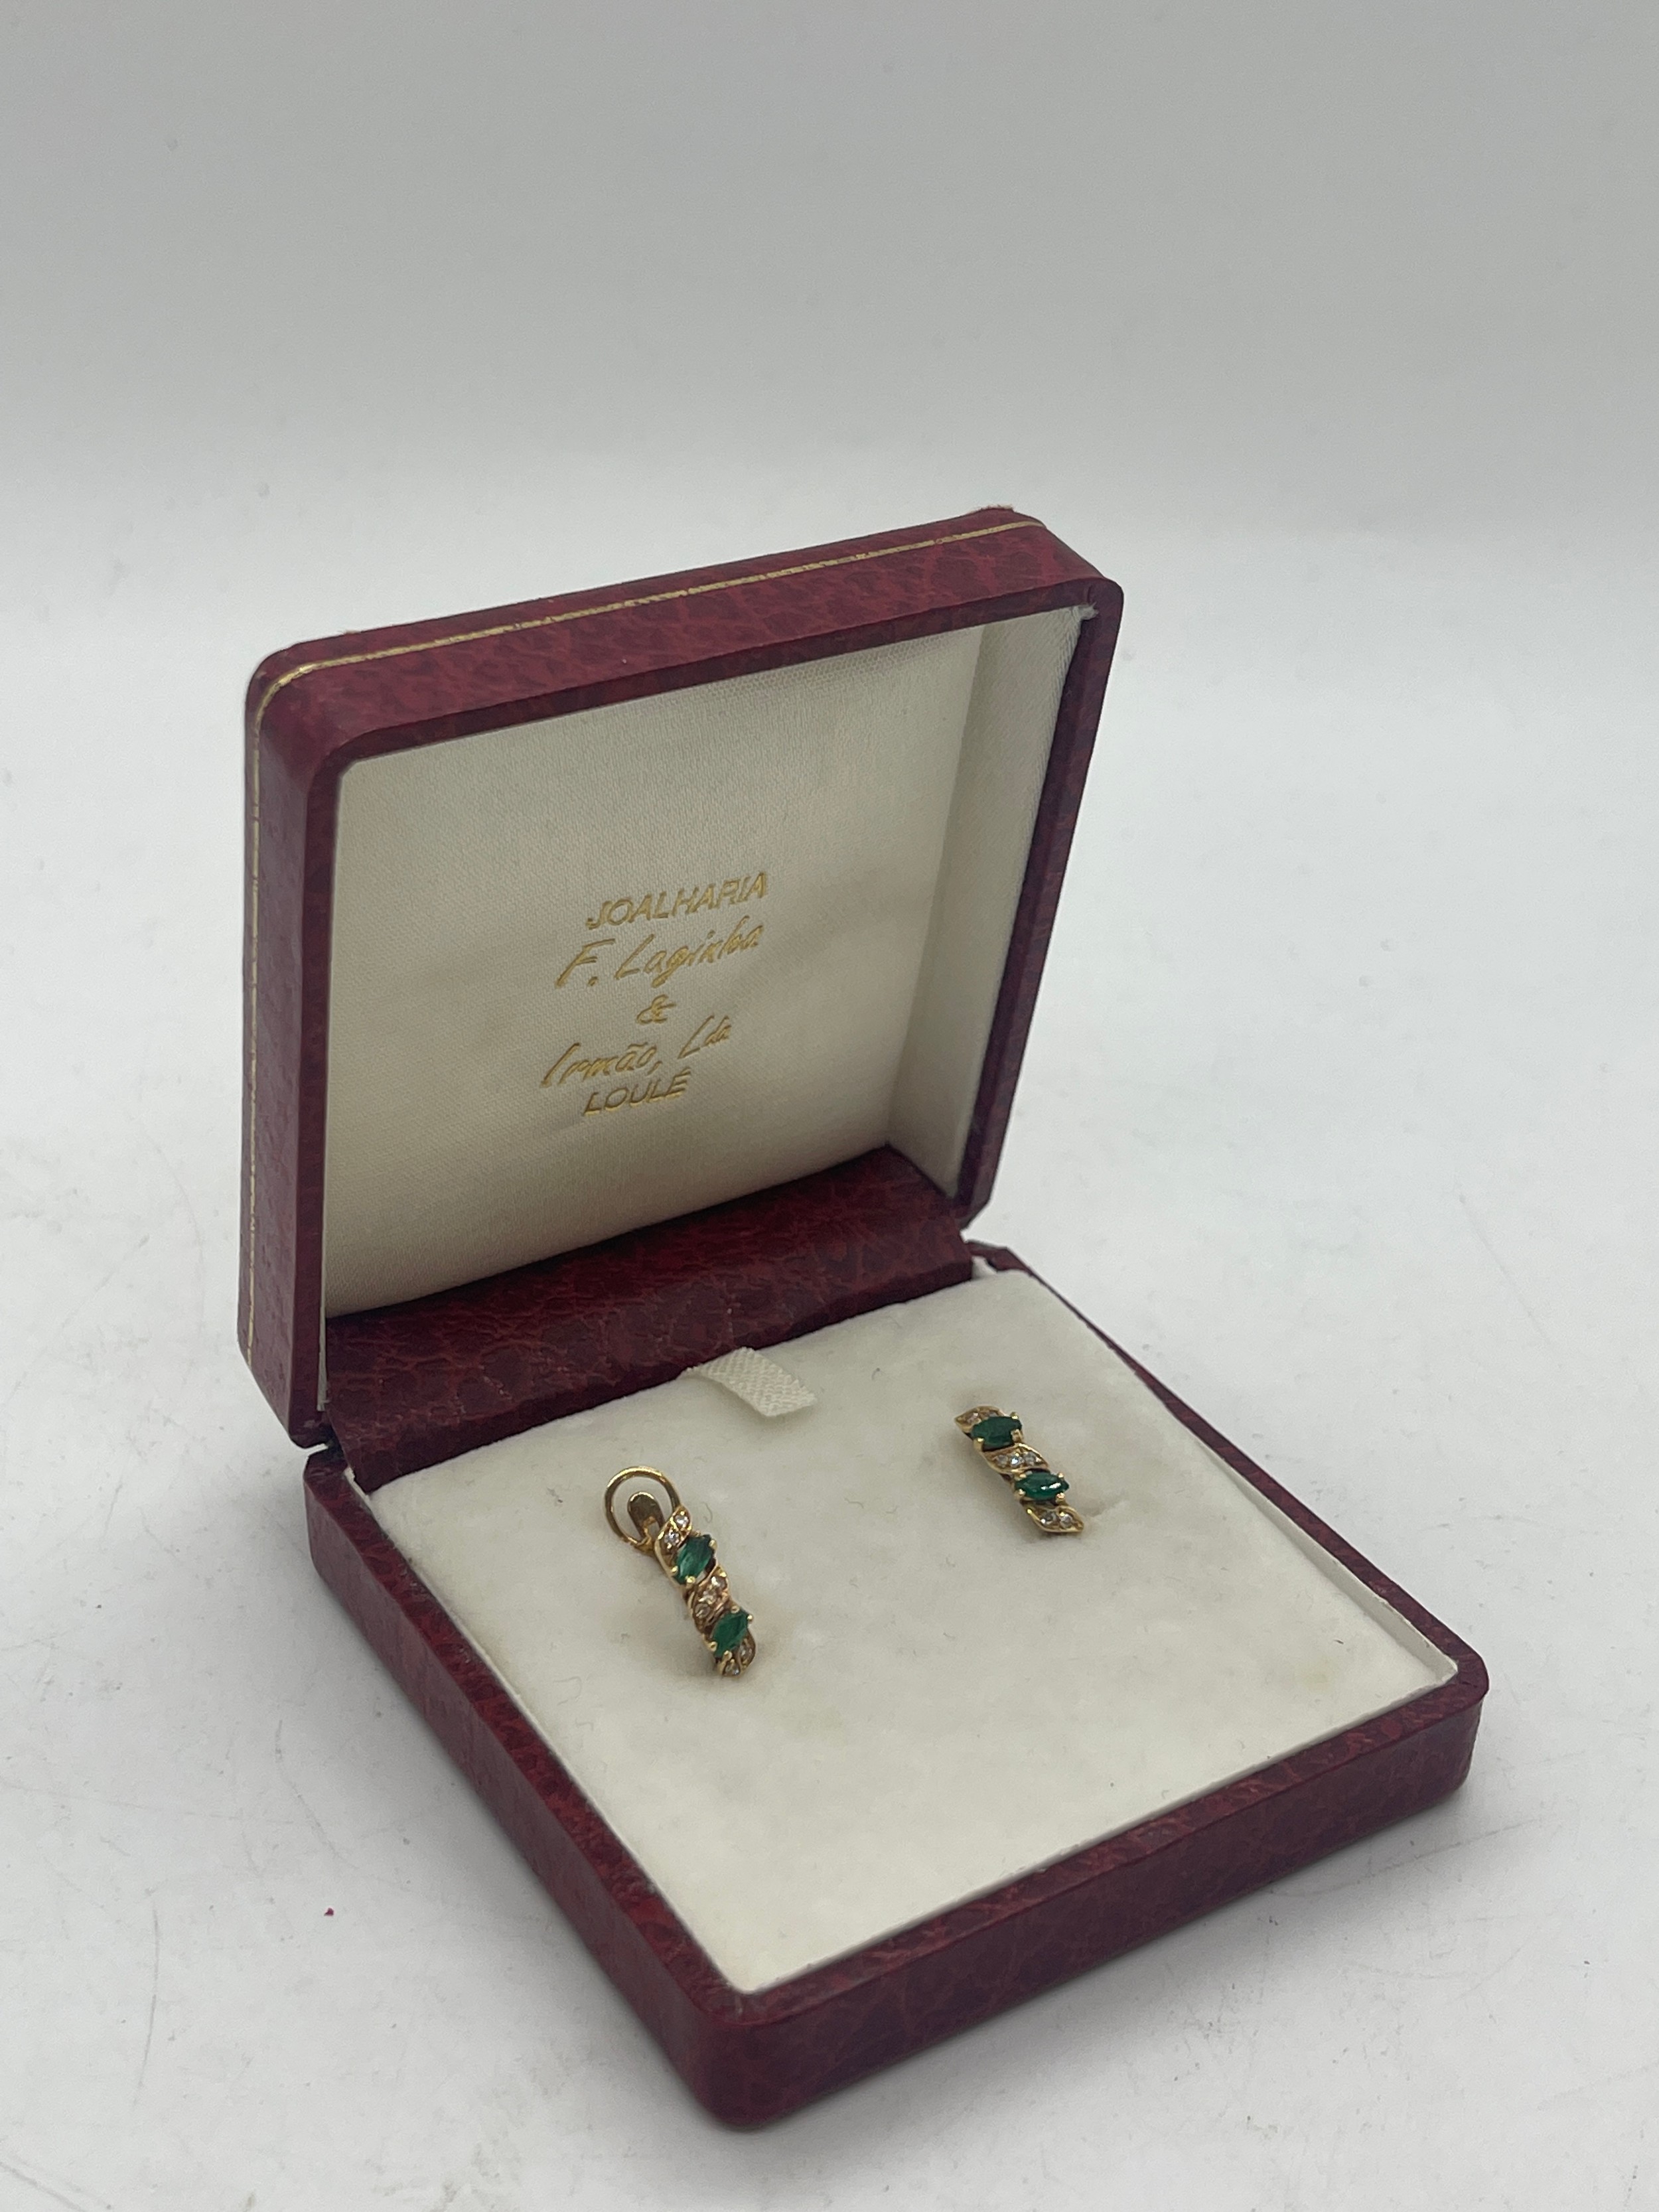 Pair of 18ct diamond and emerald earrings 2.9 grams - Image 6 of 7